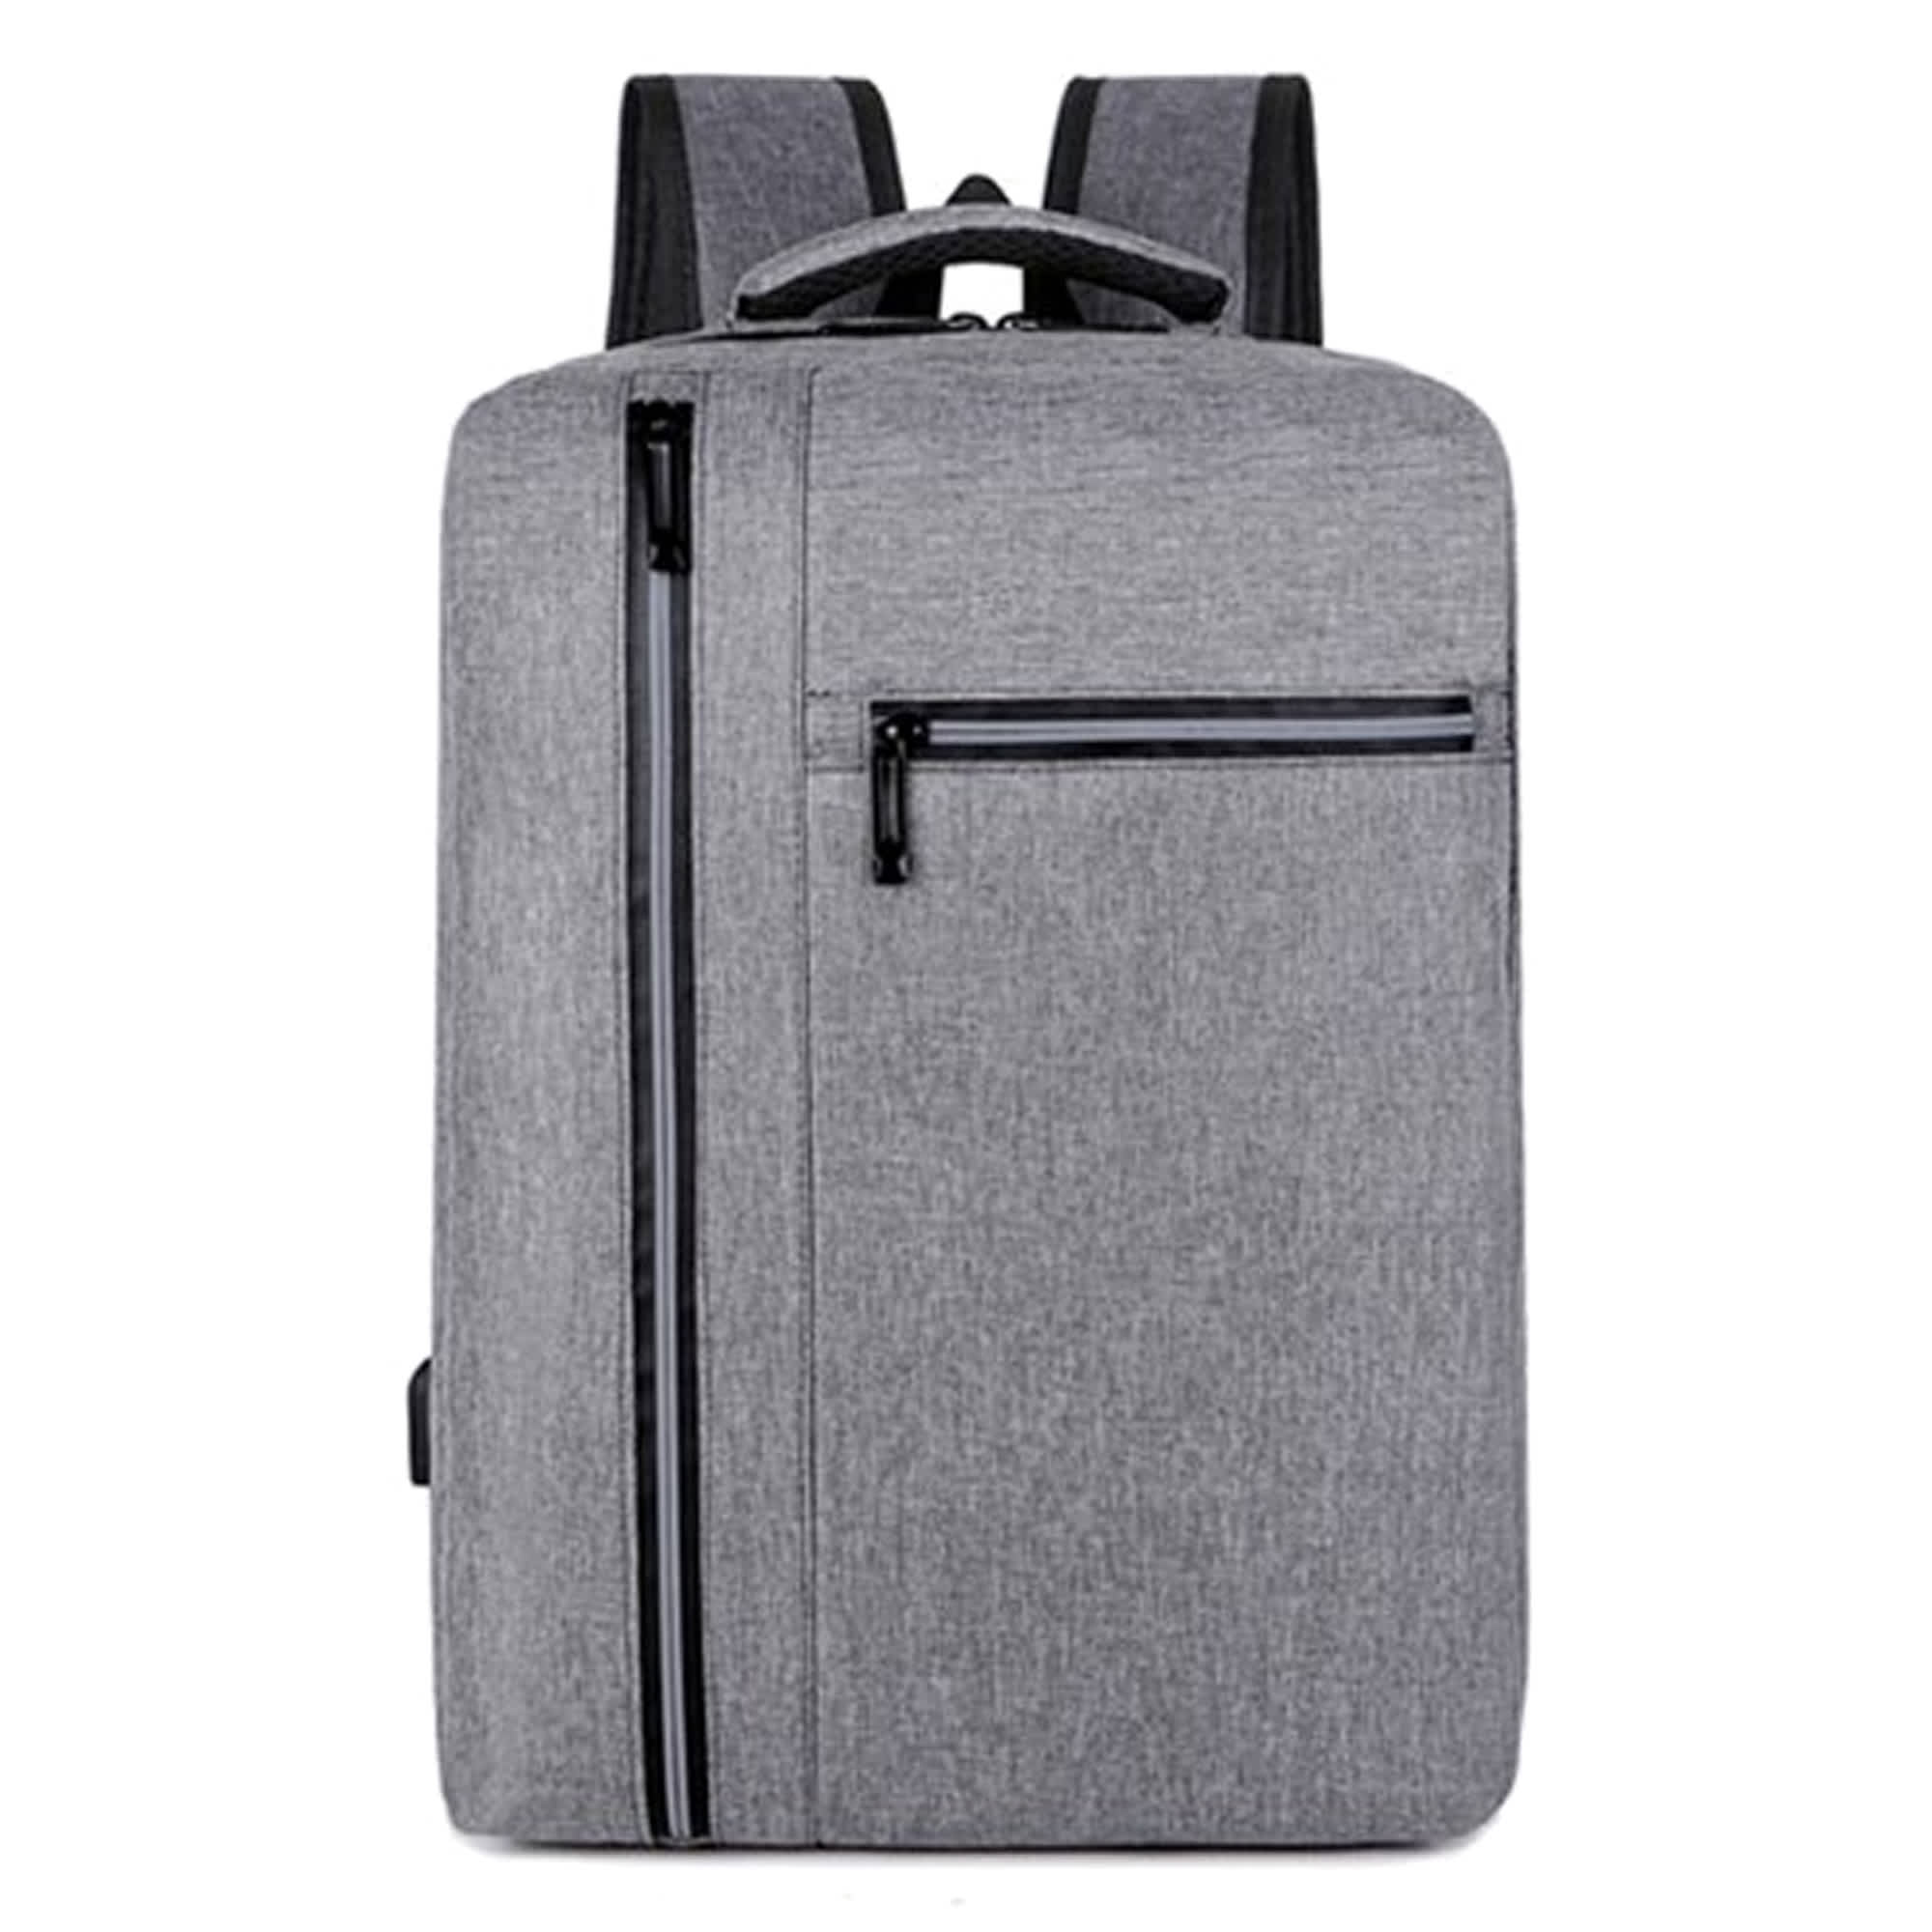 Backpacks Archives - Modern Promotions